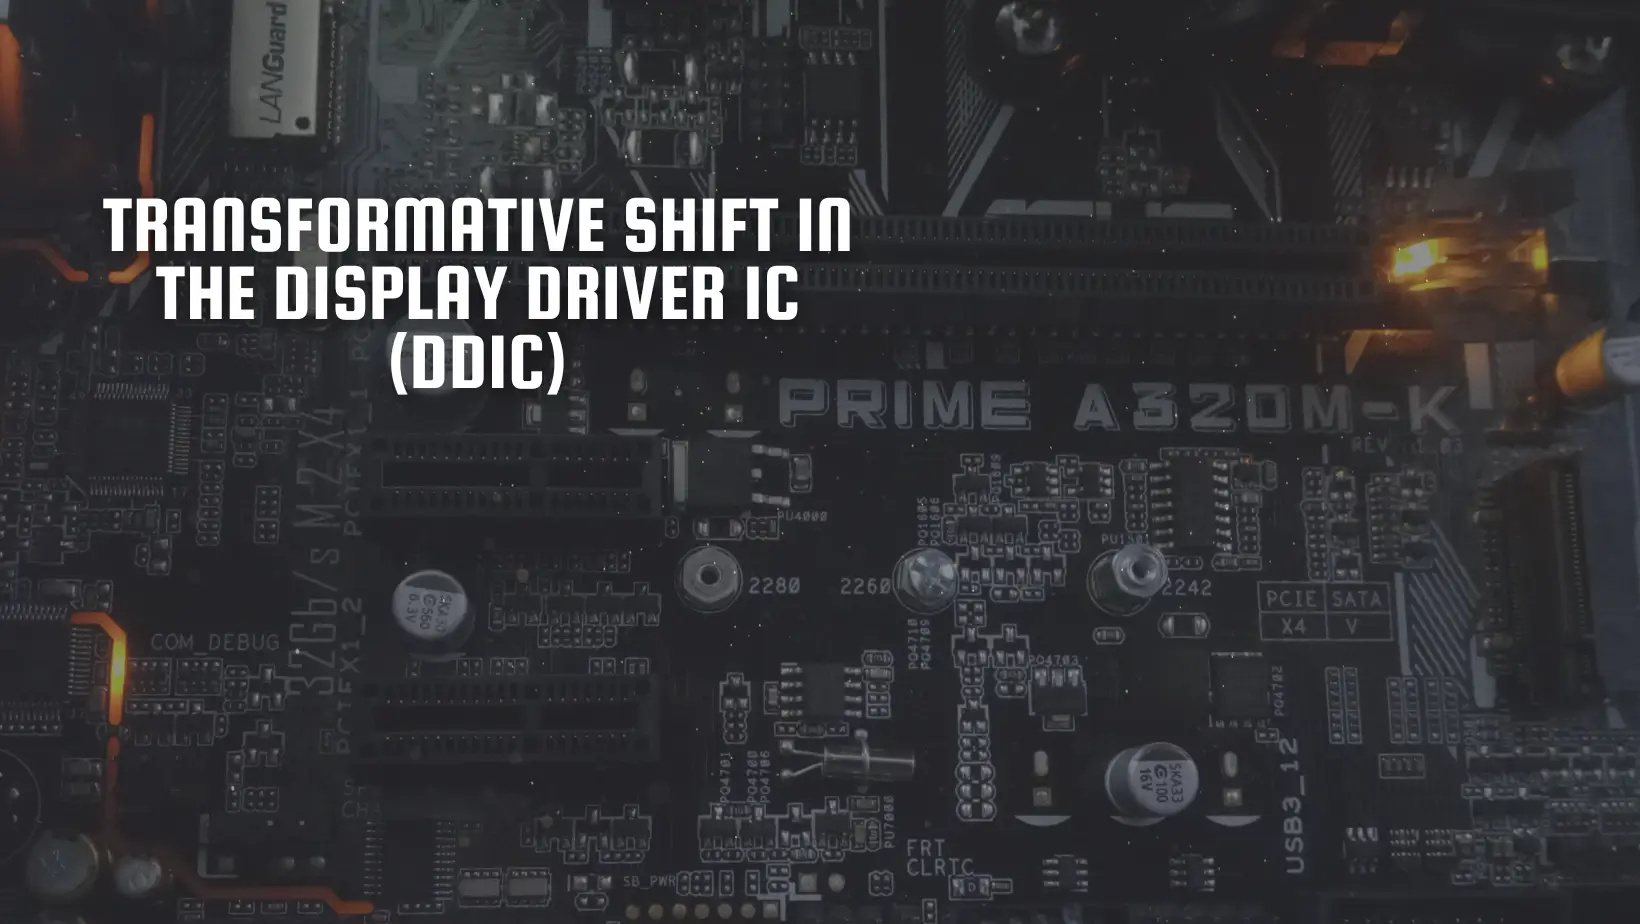 Transformative shift in the display driver IC (DDIC)